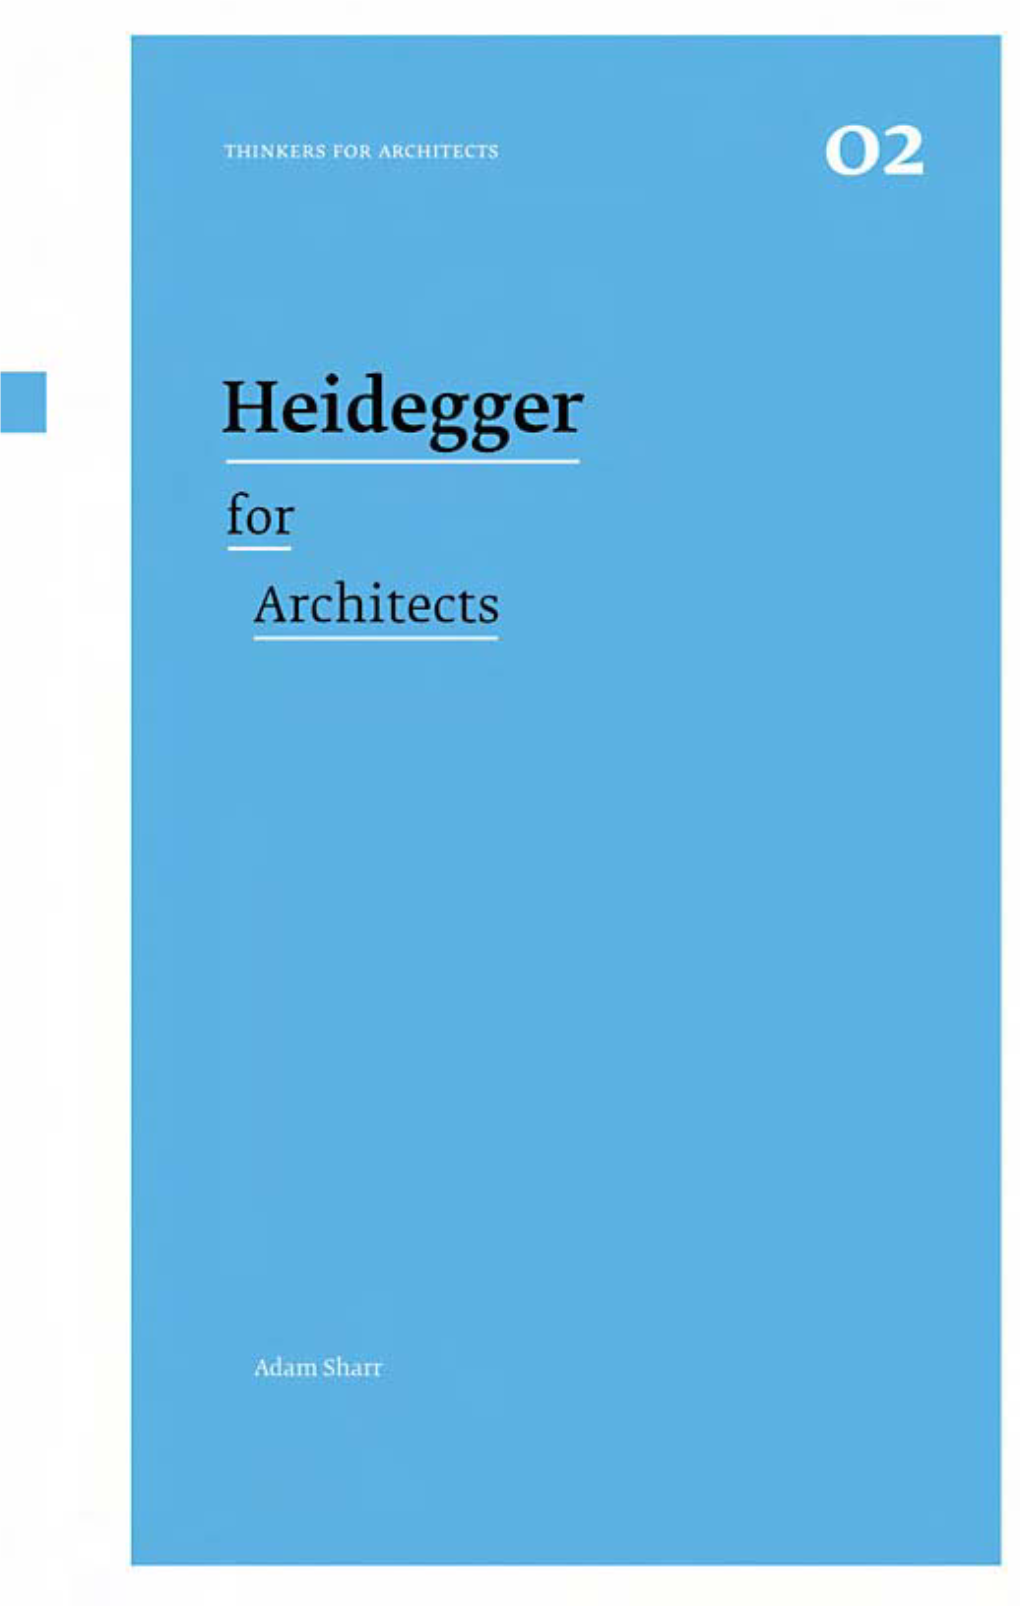 HEIDEGGER for ARCHITECTS Thinkers for Architects